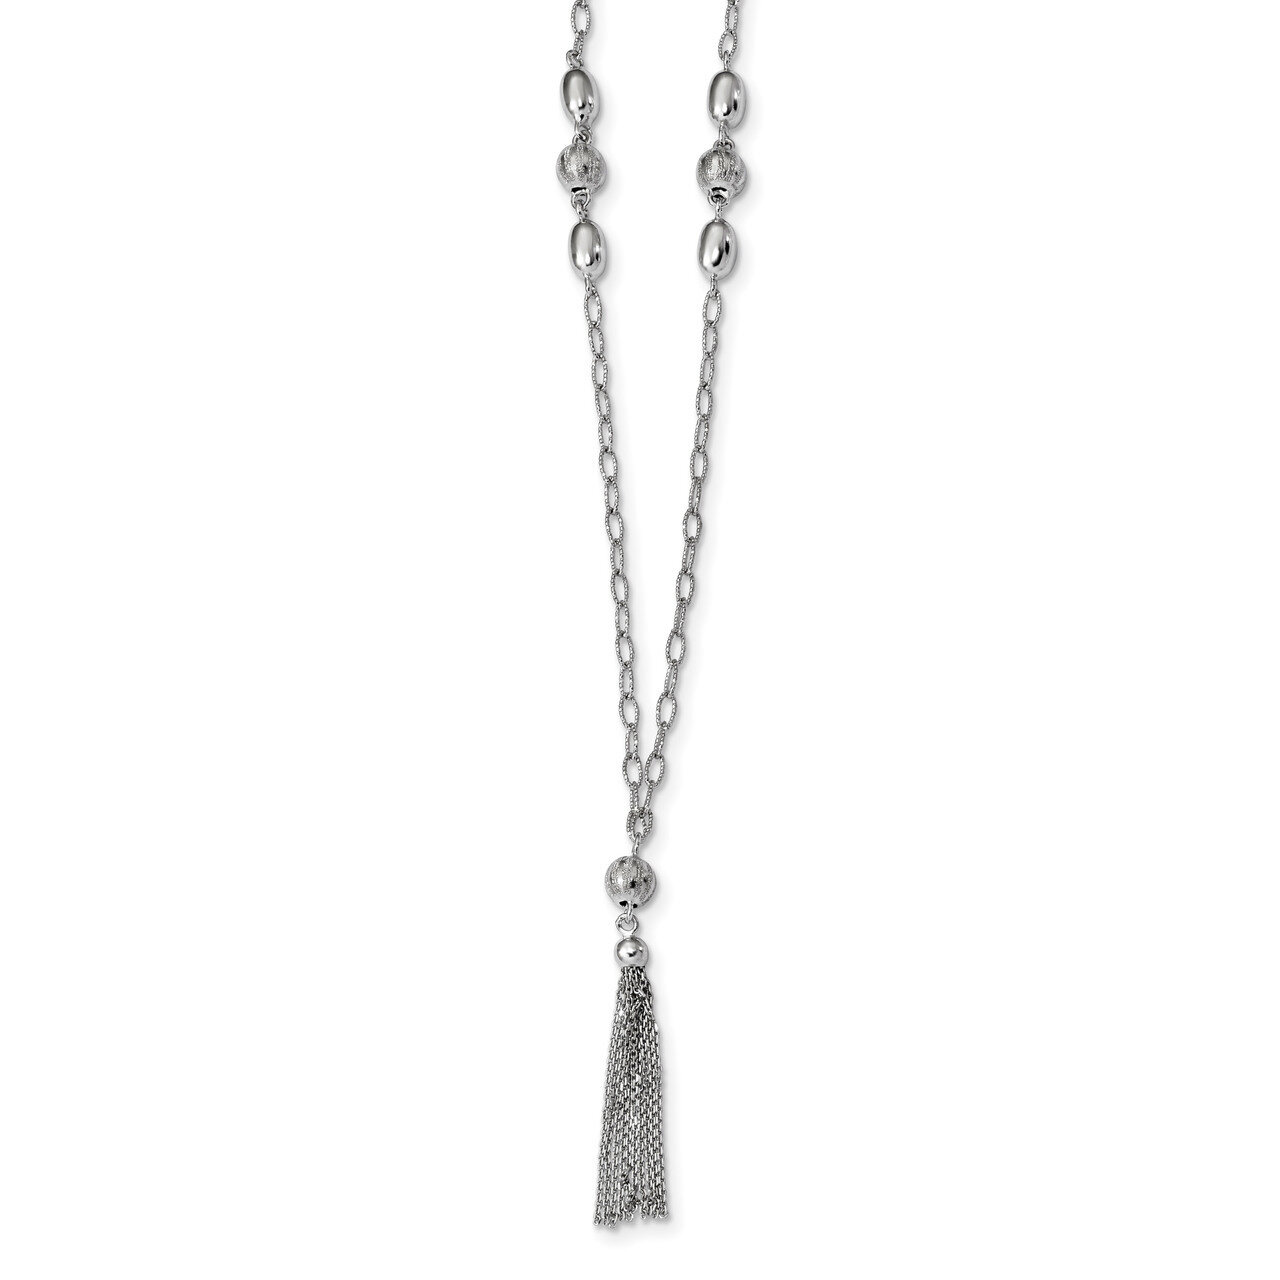 Diamond-cut & Polished Beaded Tassel Necklace 18 Inch Sterling Silver Rhodium-plated QG4337-18